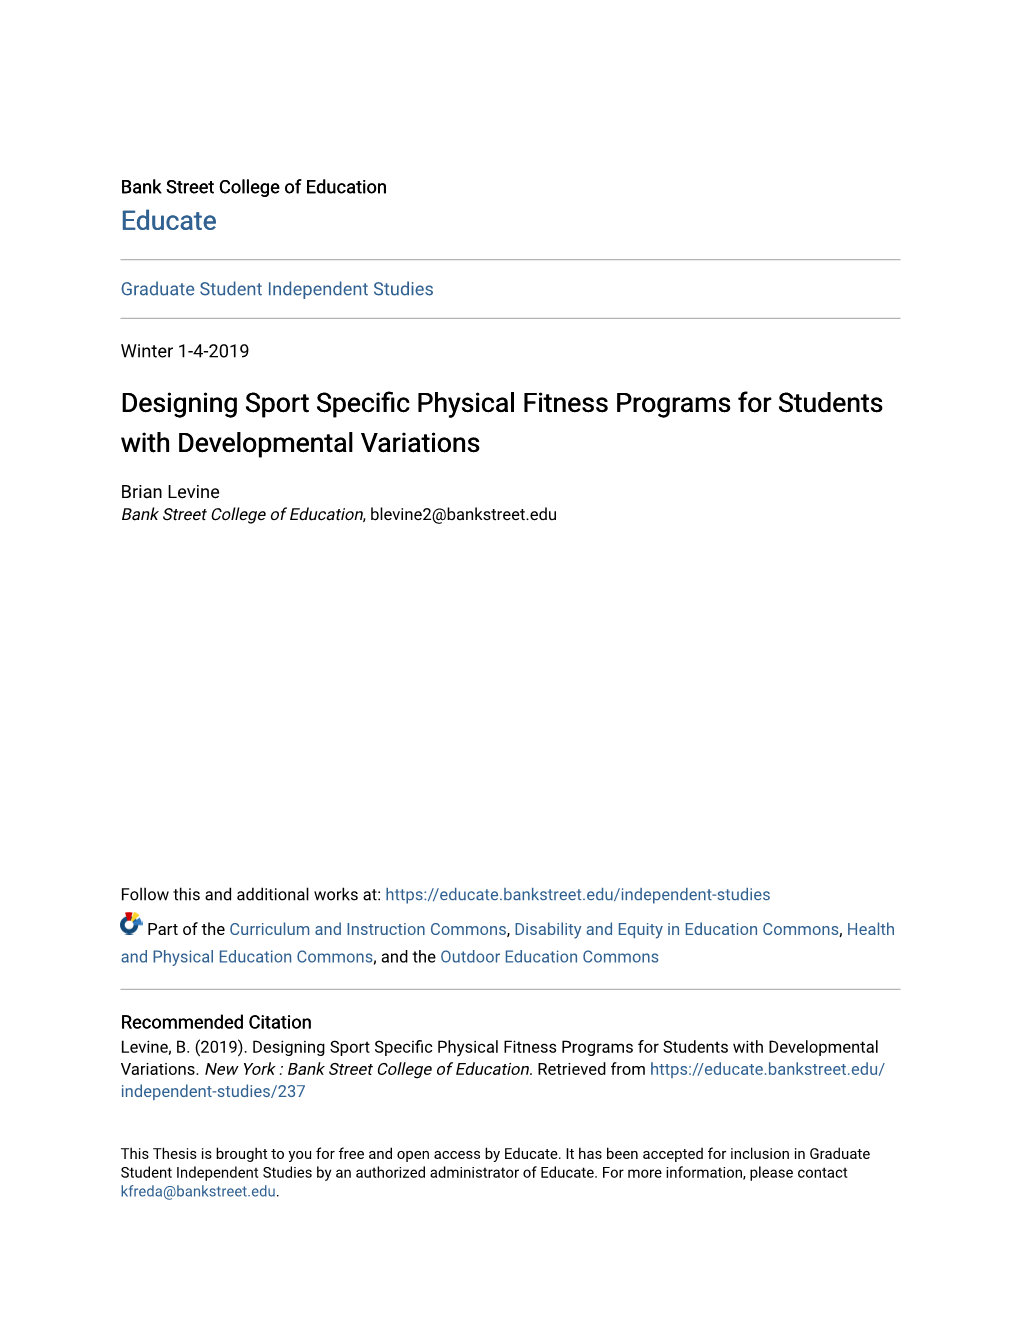 Designing Sport Specific Physical Fitness Programs for Students with Developmental Variations